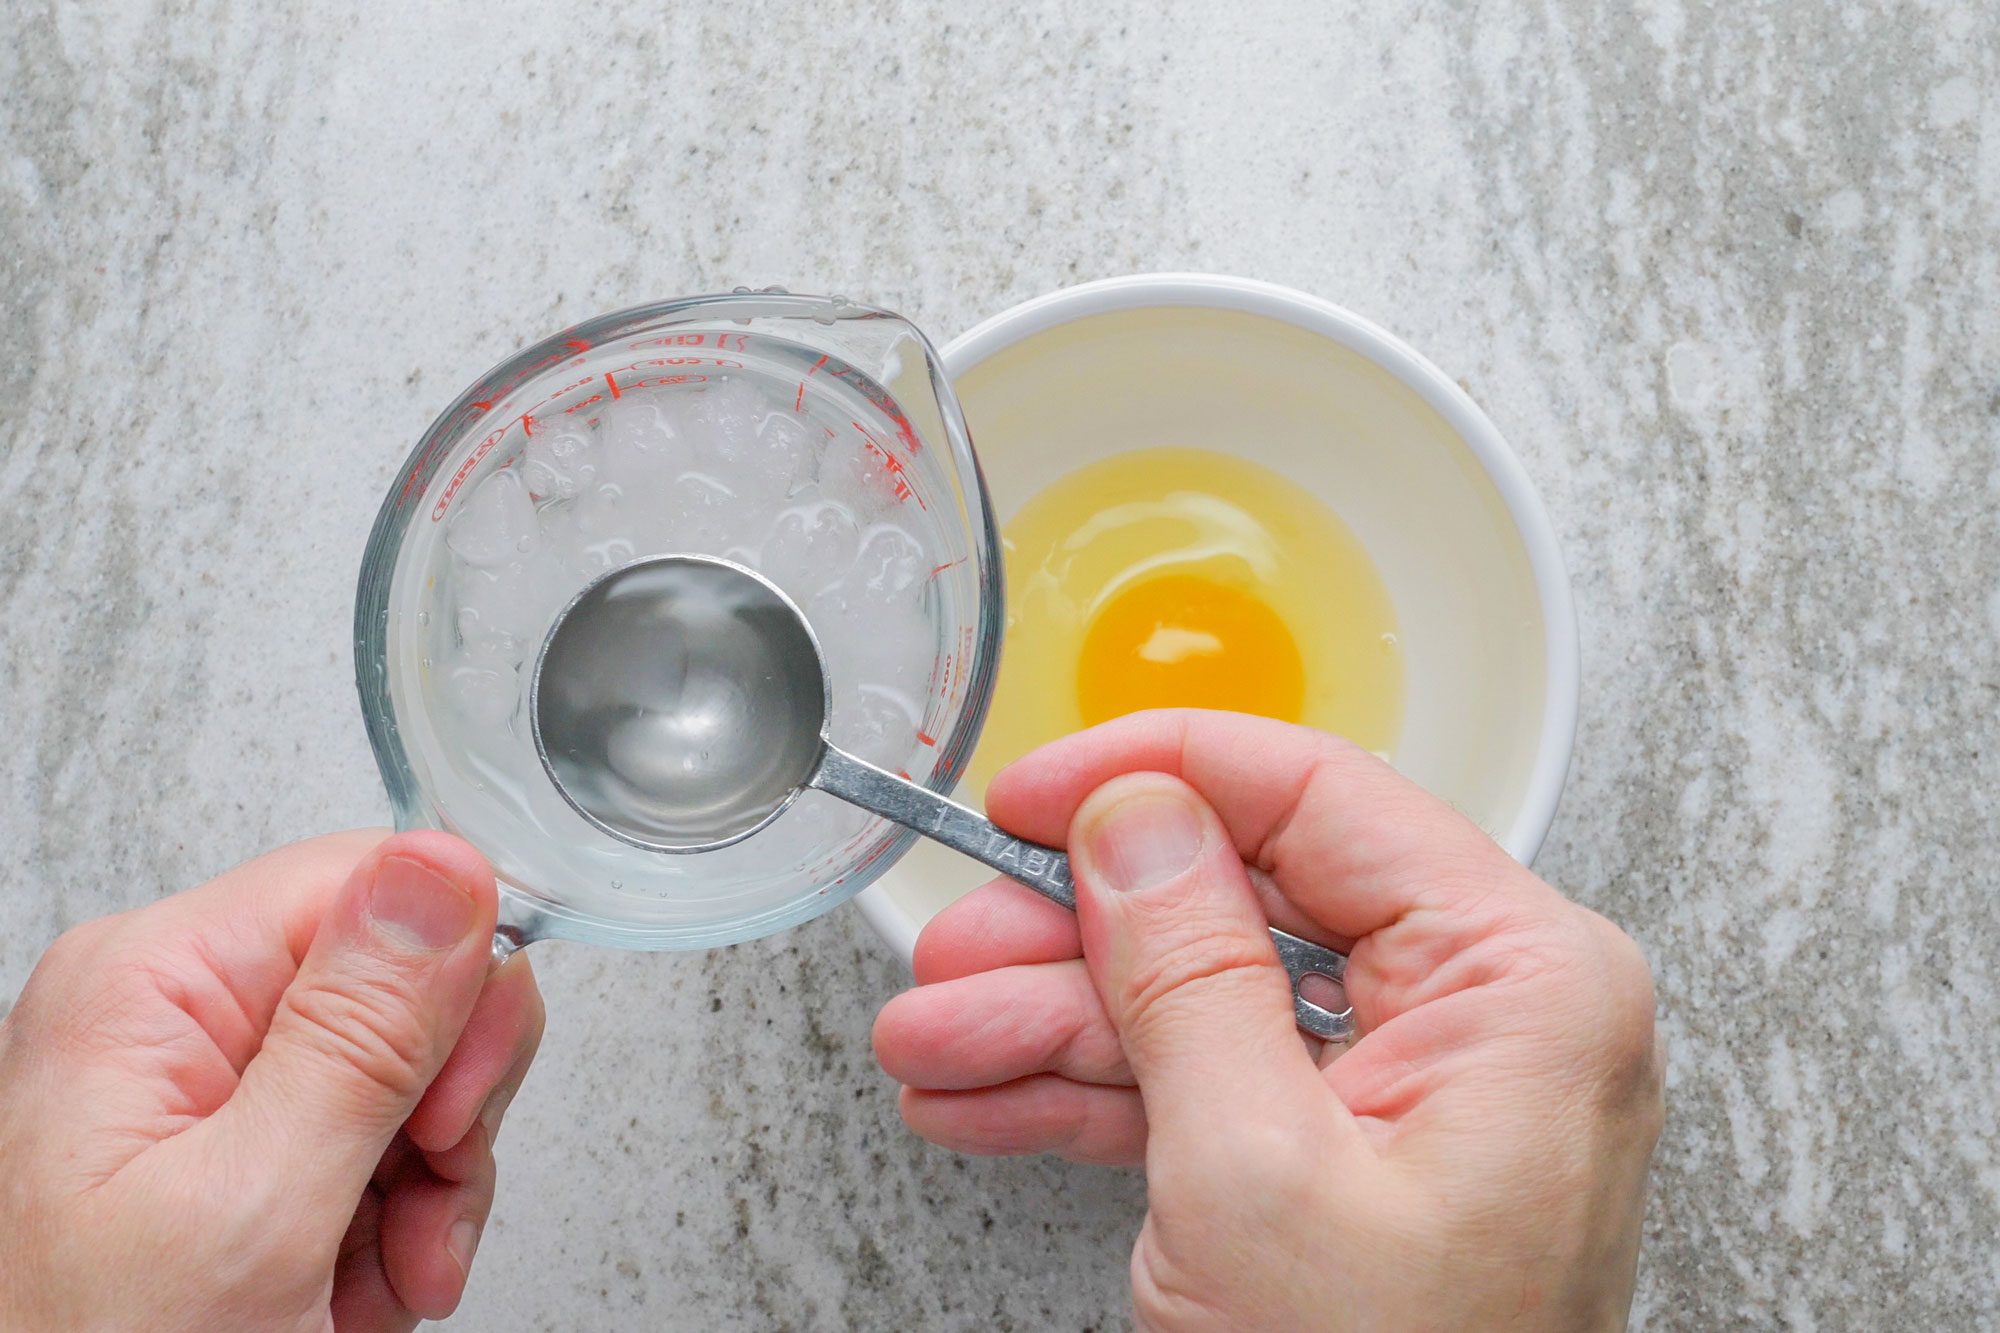 In a small bowl mix egg, ice water and vinegar